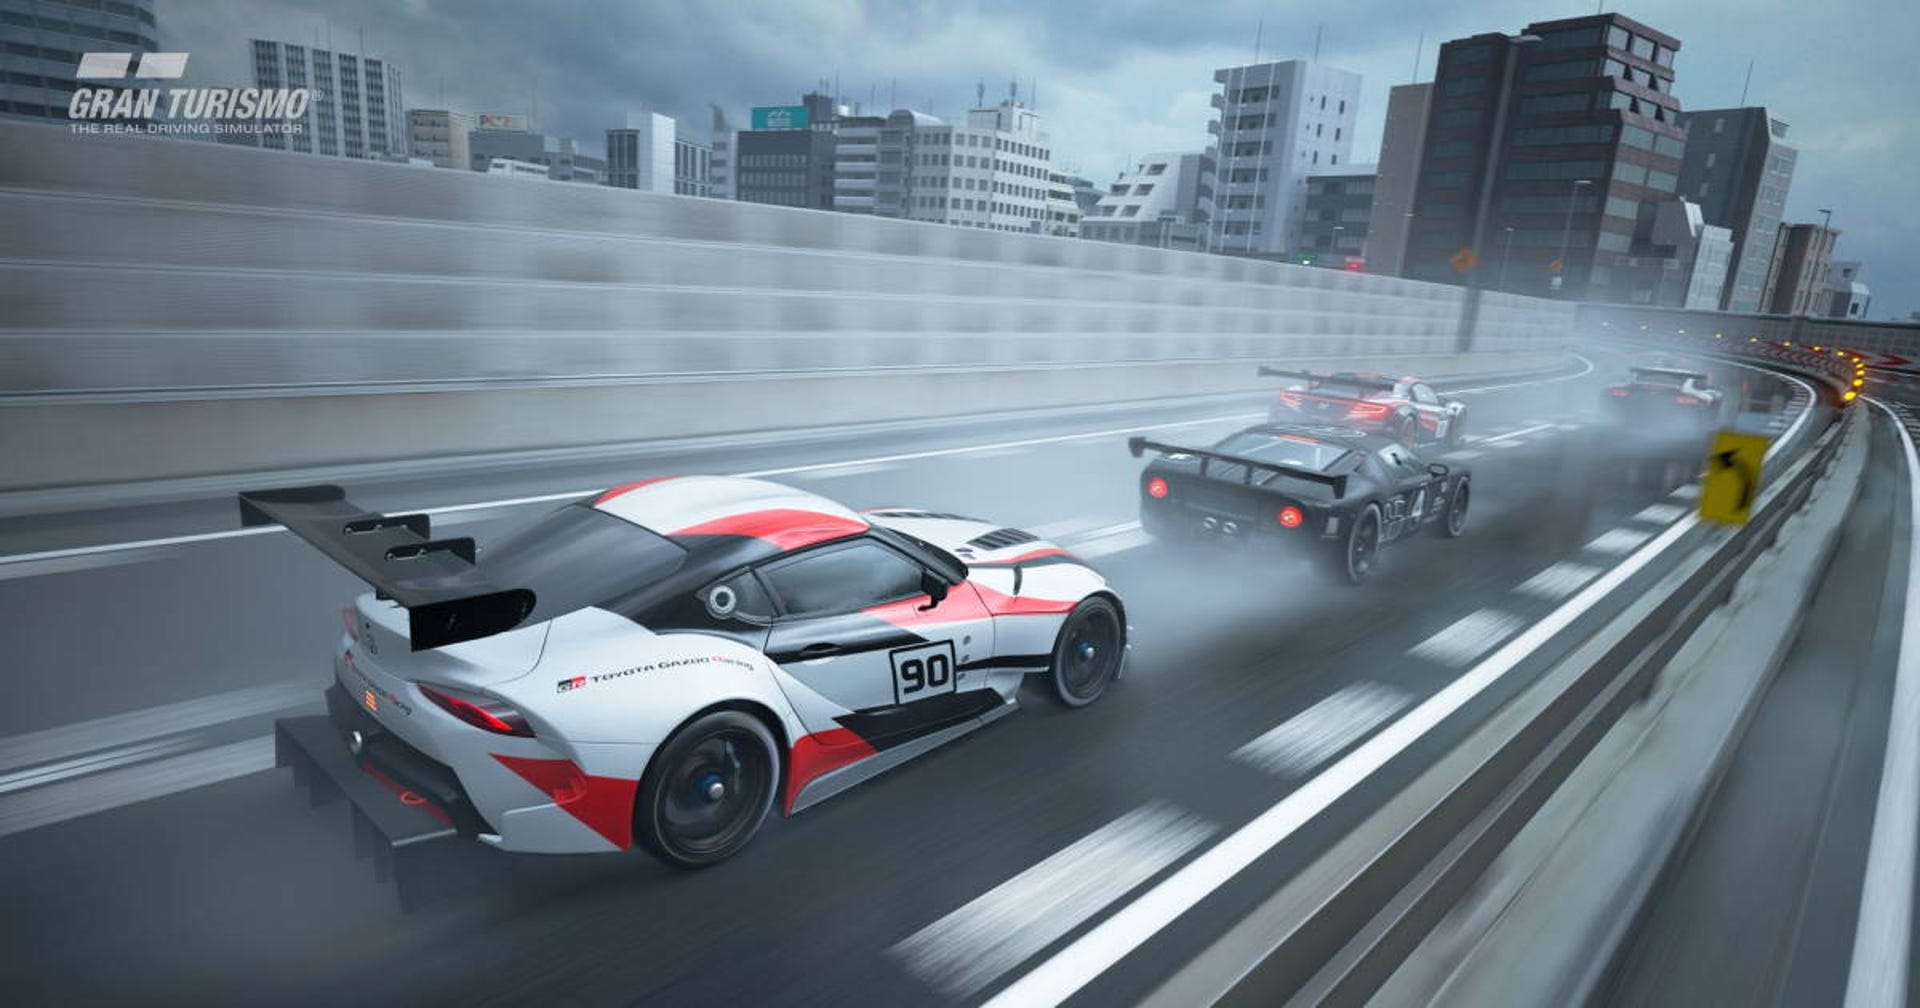 Gran Turismo' Movie Release Date Confirmed, and It's Based on a True Story  - CNET